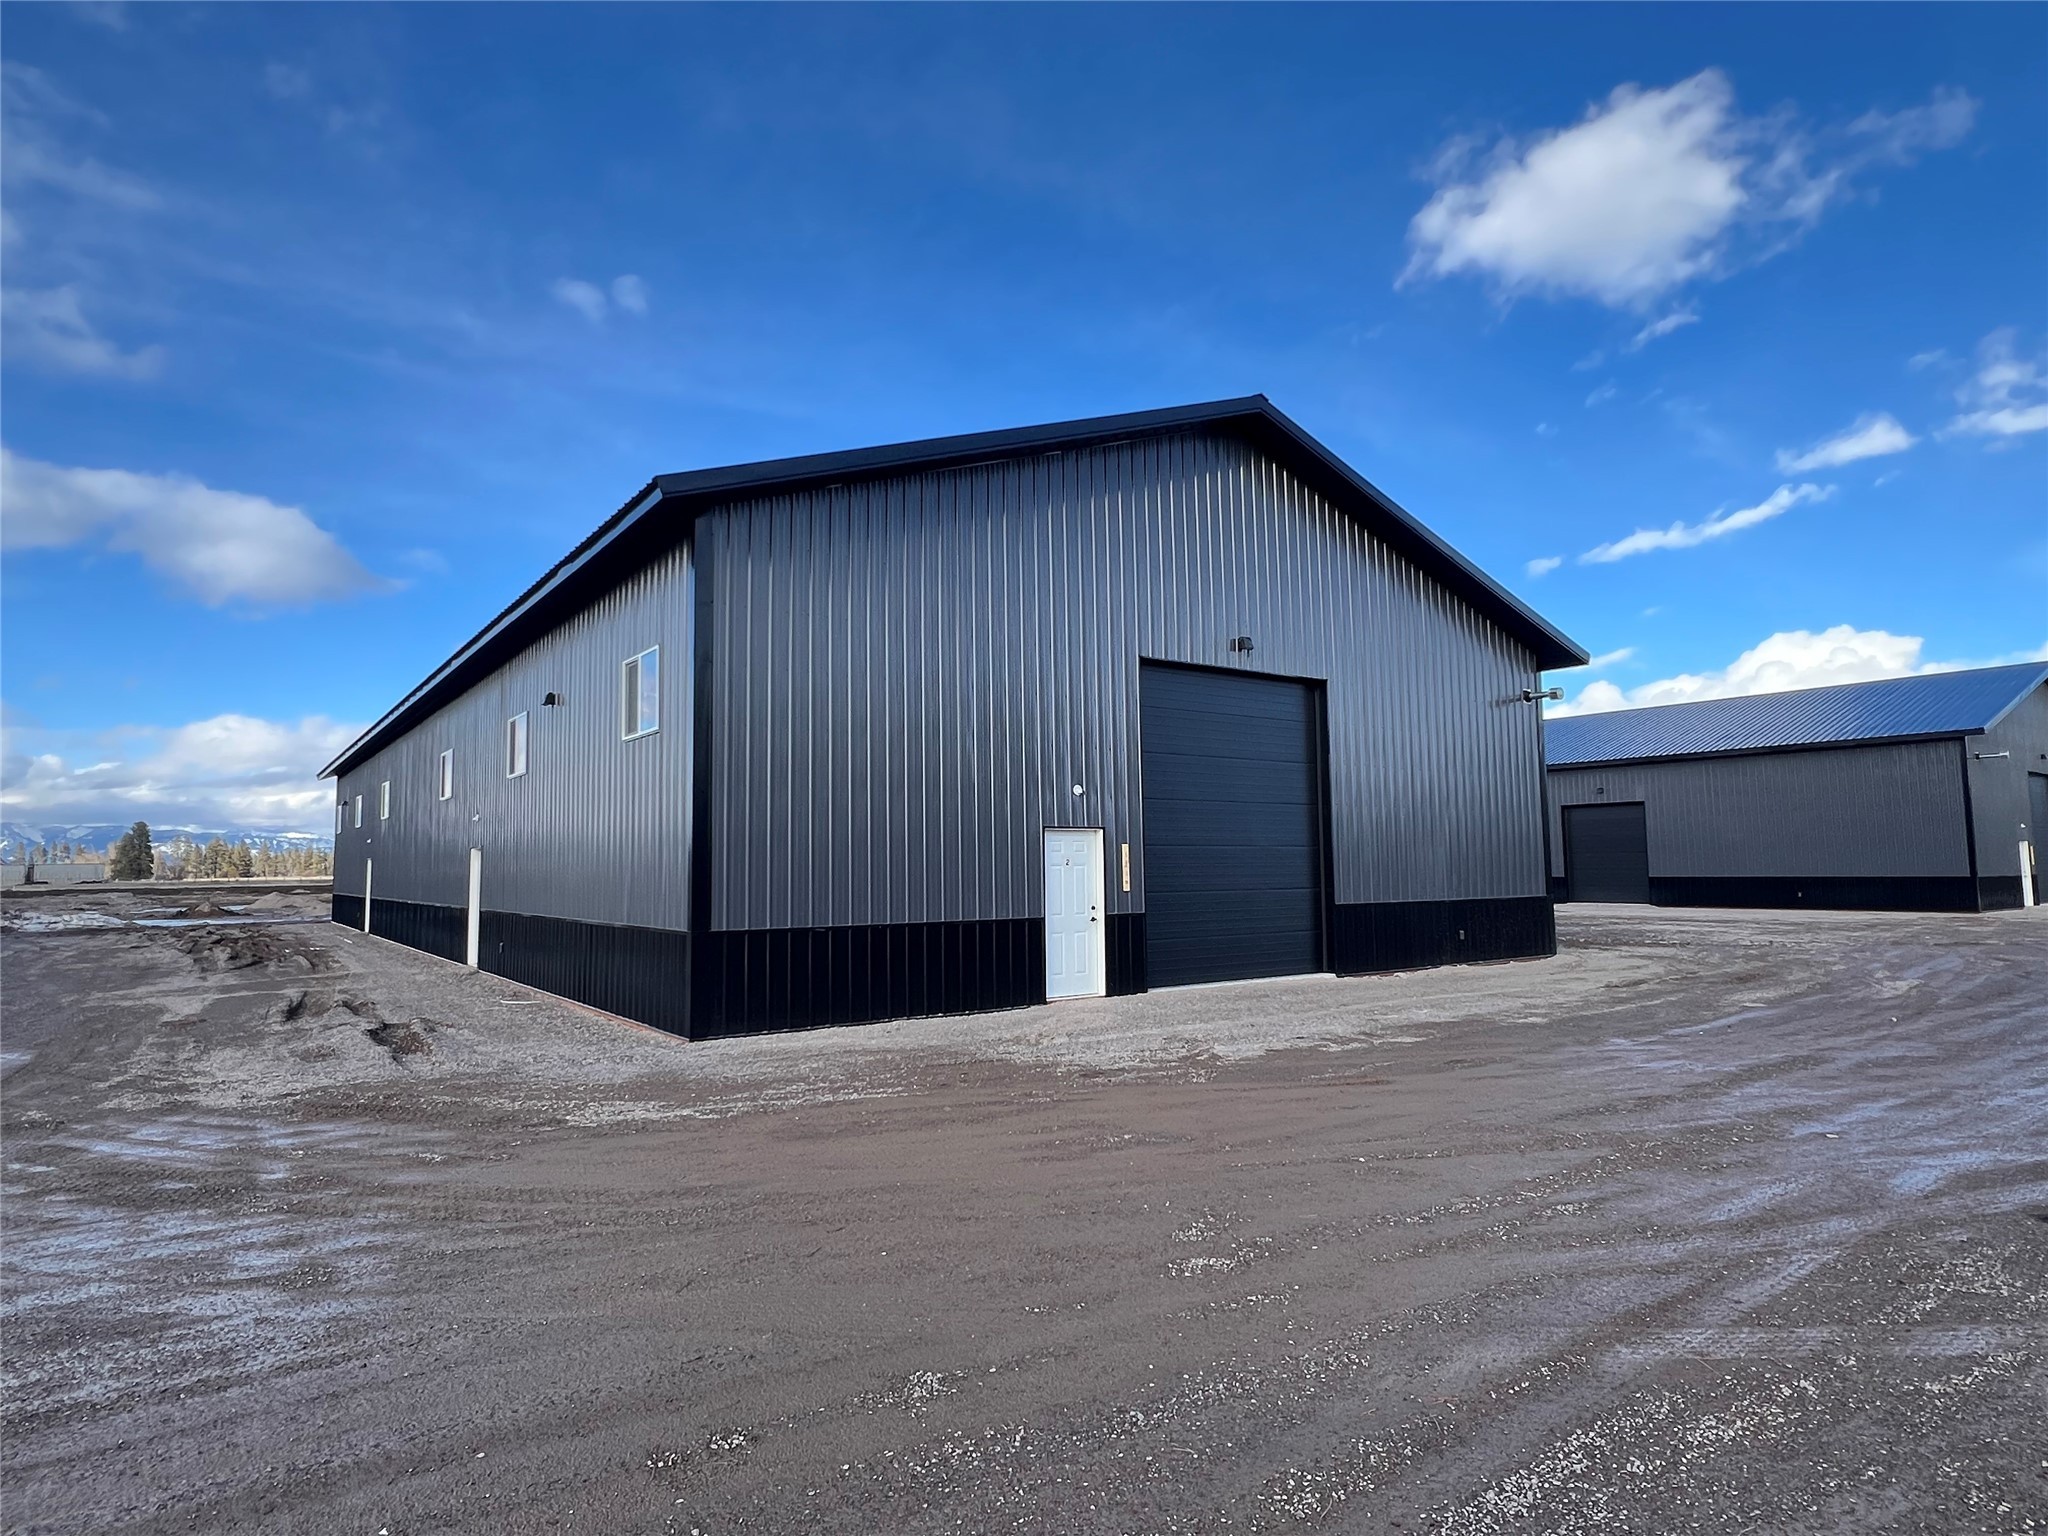 3000 Square Foot (50x60) shop/warehouse space available for lease.  This new development, with access off of Highway 2E and E Reserve, has 6000 SF buildings available as a whole or half building.  359 Unit 2 is a half building with bathroom, two man doors, and two overhead doors (12x14 and 10x12).  The building has metal walls and ceiling interior finishes, 16' walls, gas heater, evergreen water, private sewer, and 200 Amp service.  The development is paved, and set up for tractor trailer circulation and deliveries.  Call Zac Andrews at 406-250-6160, or your Real Estate Professional.